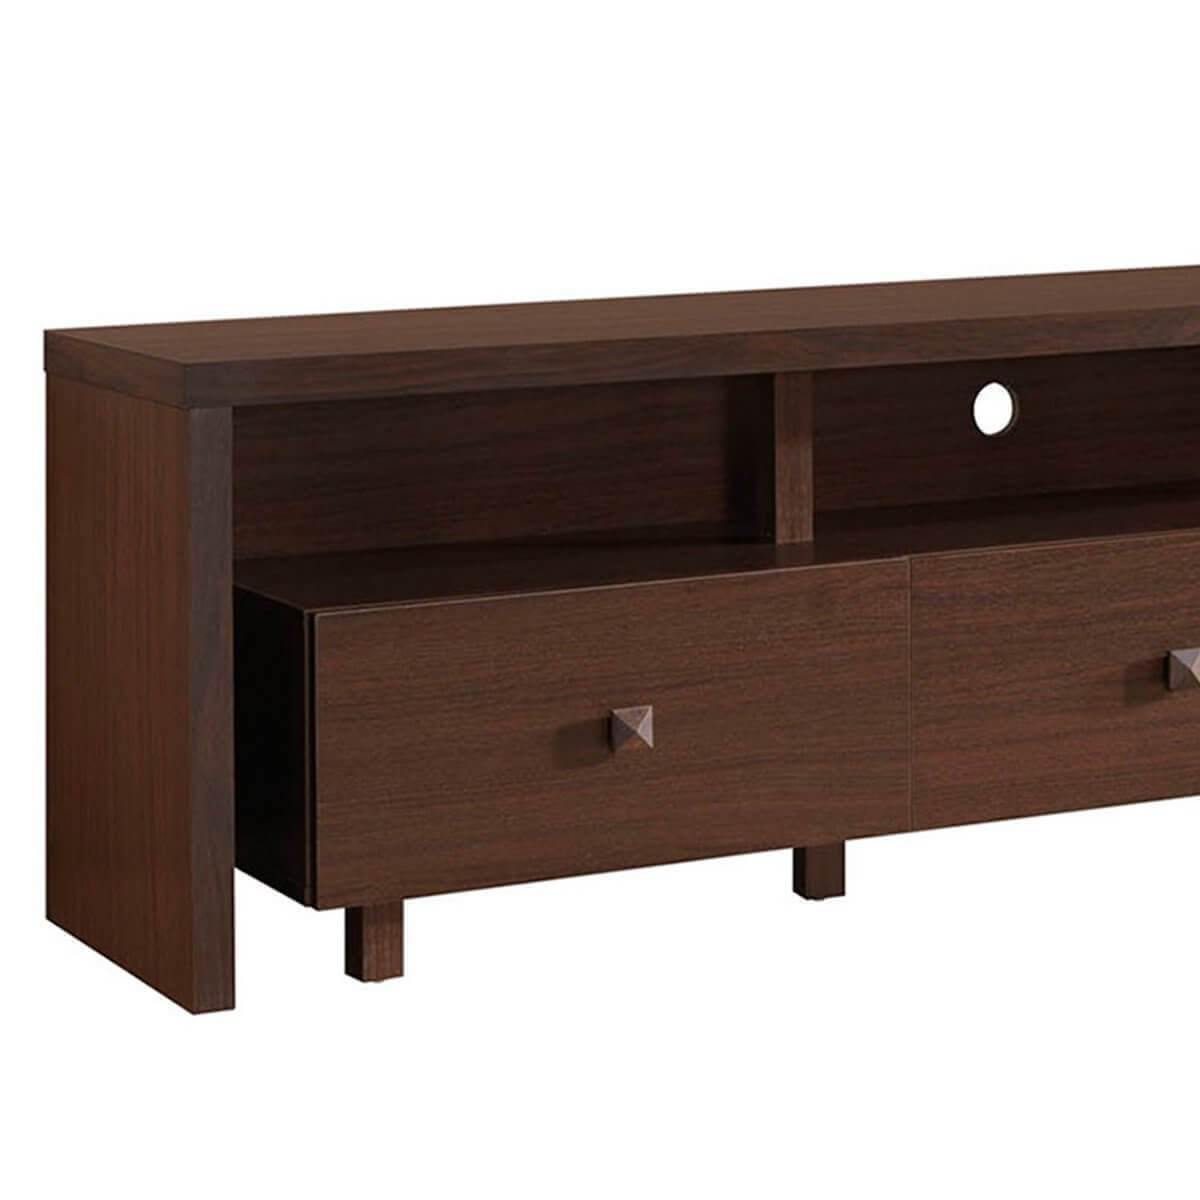 Techni Mobili Hickory Elegant TV Stand for TV's Up To 75" with Storage RTA-8895-HRY Open Drawer